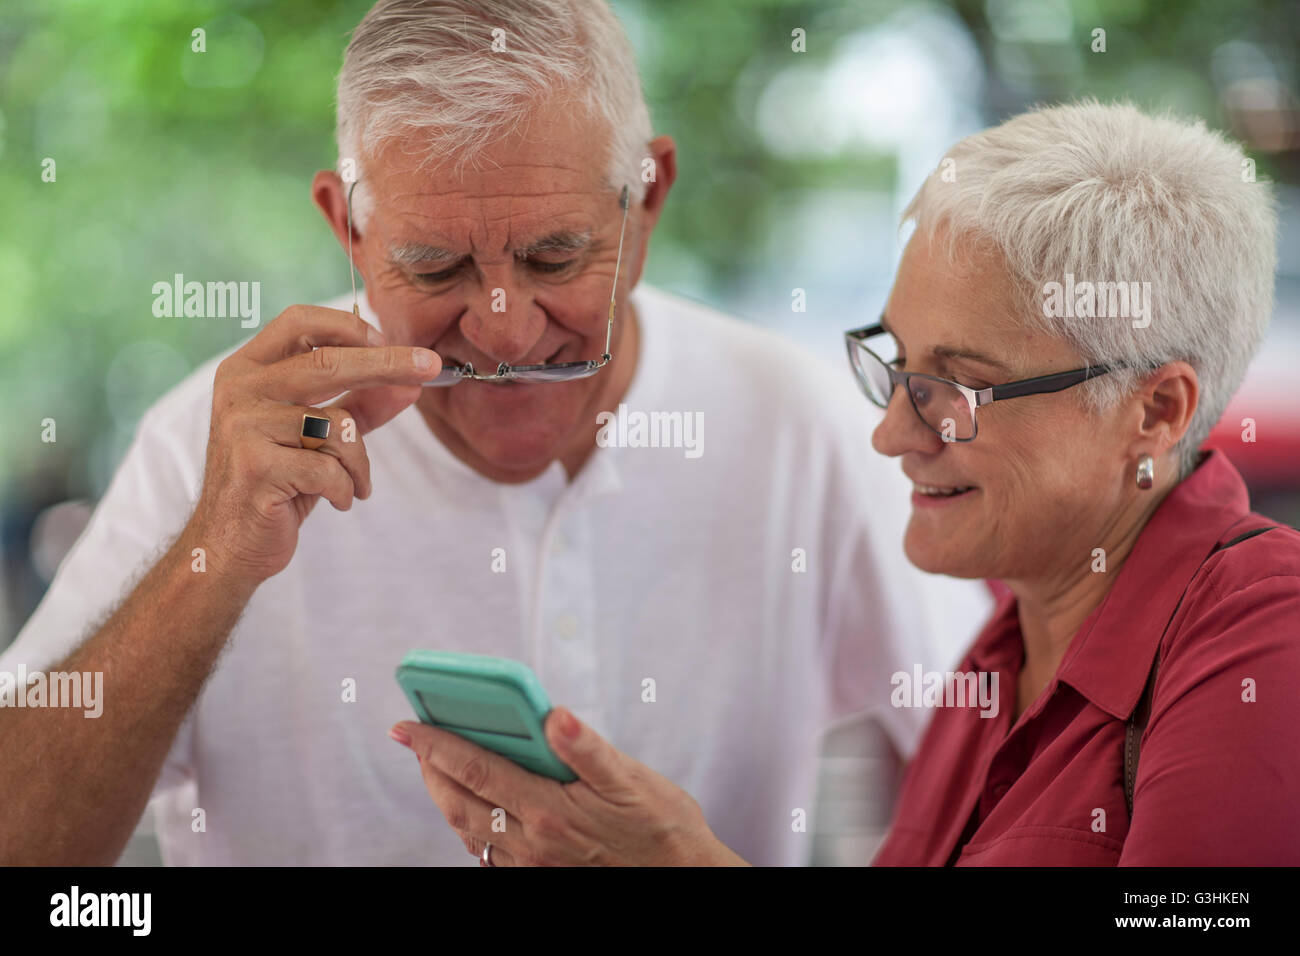 Senior man and woman wearing spectacles reading smartphone in city Stock Photo